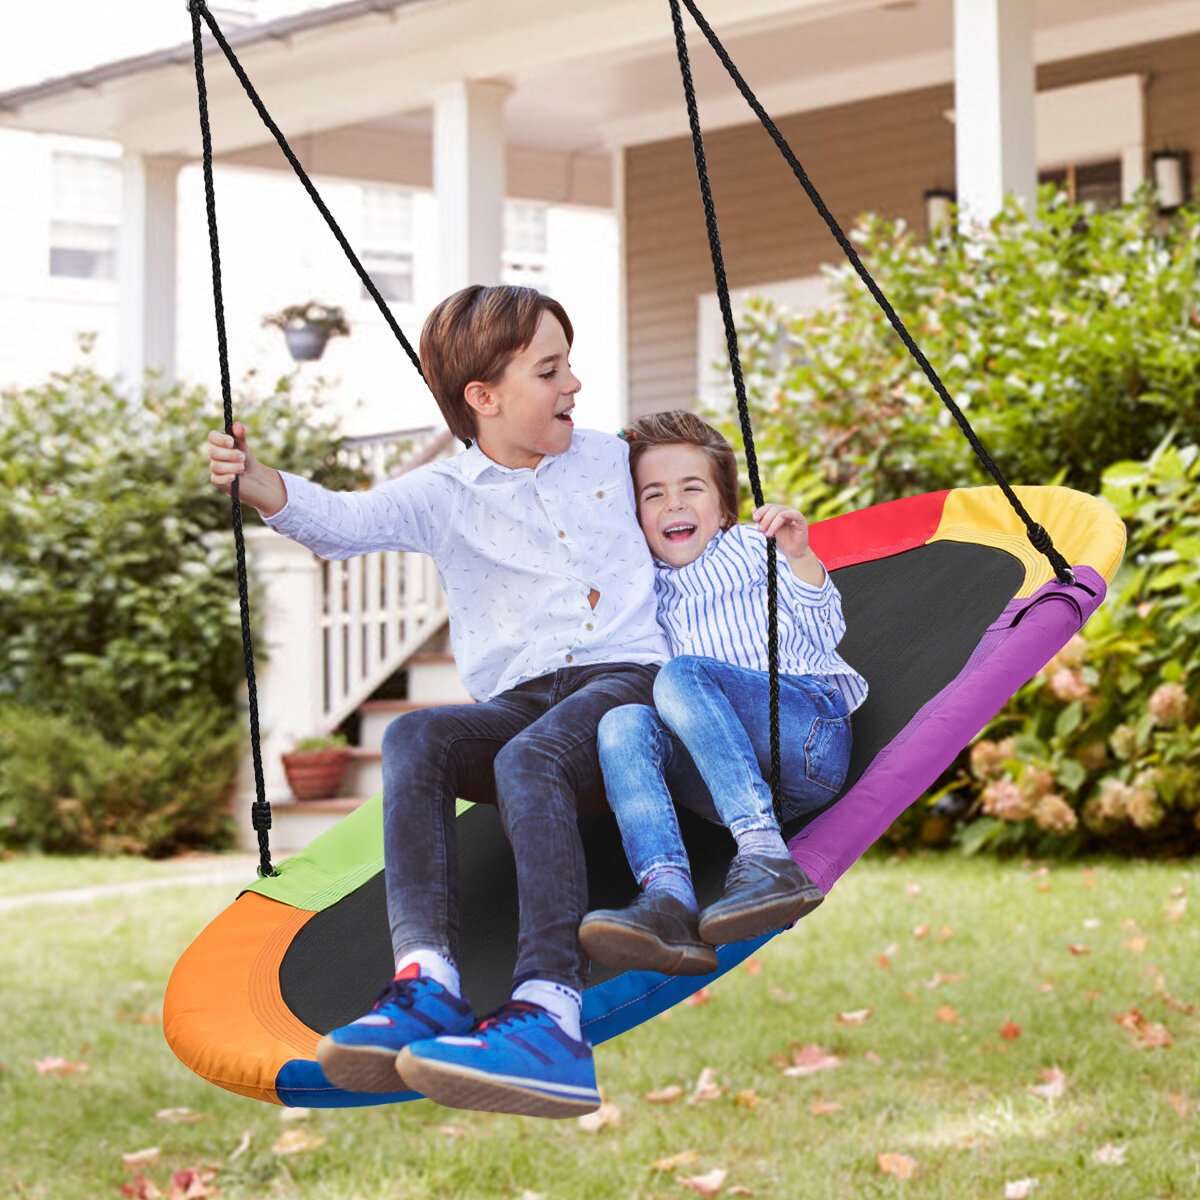 Royal Oak Giant 40 Inch Flying Saucer Tree Swing 700lb Weight Capacity for sale online 